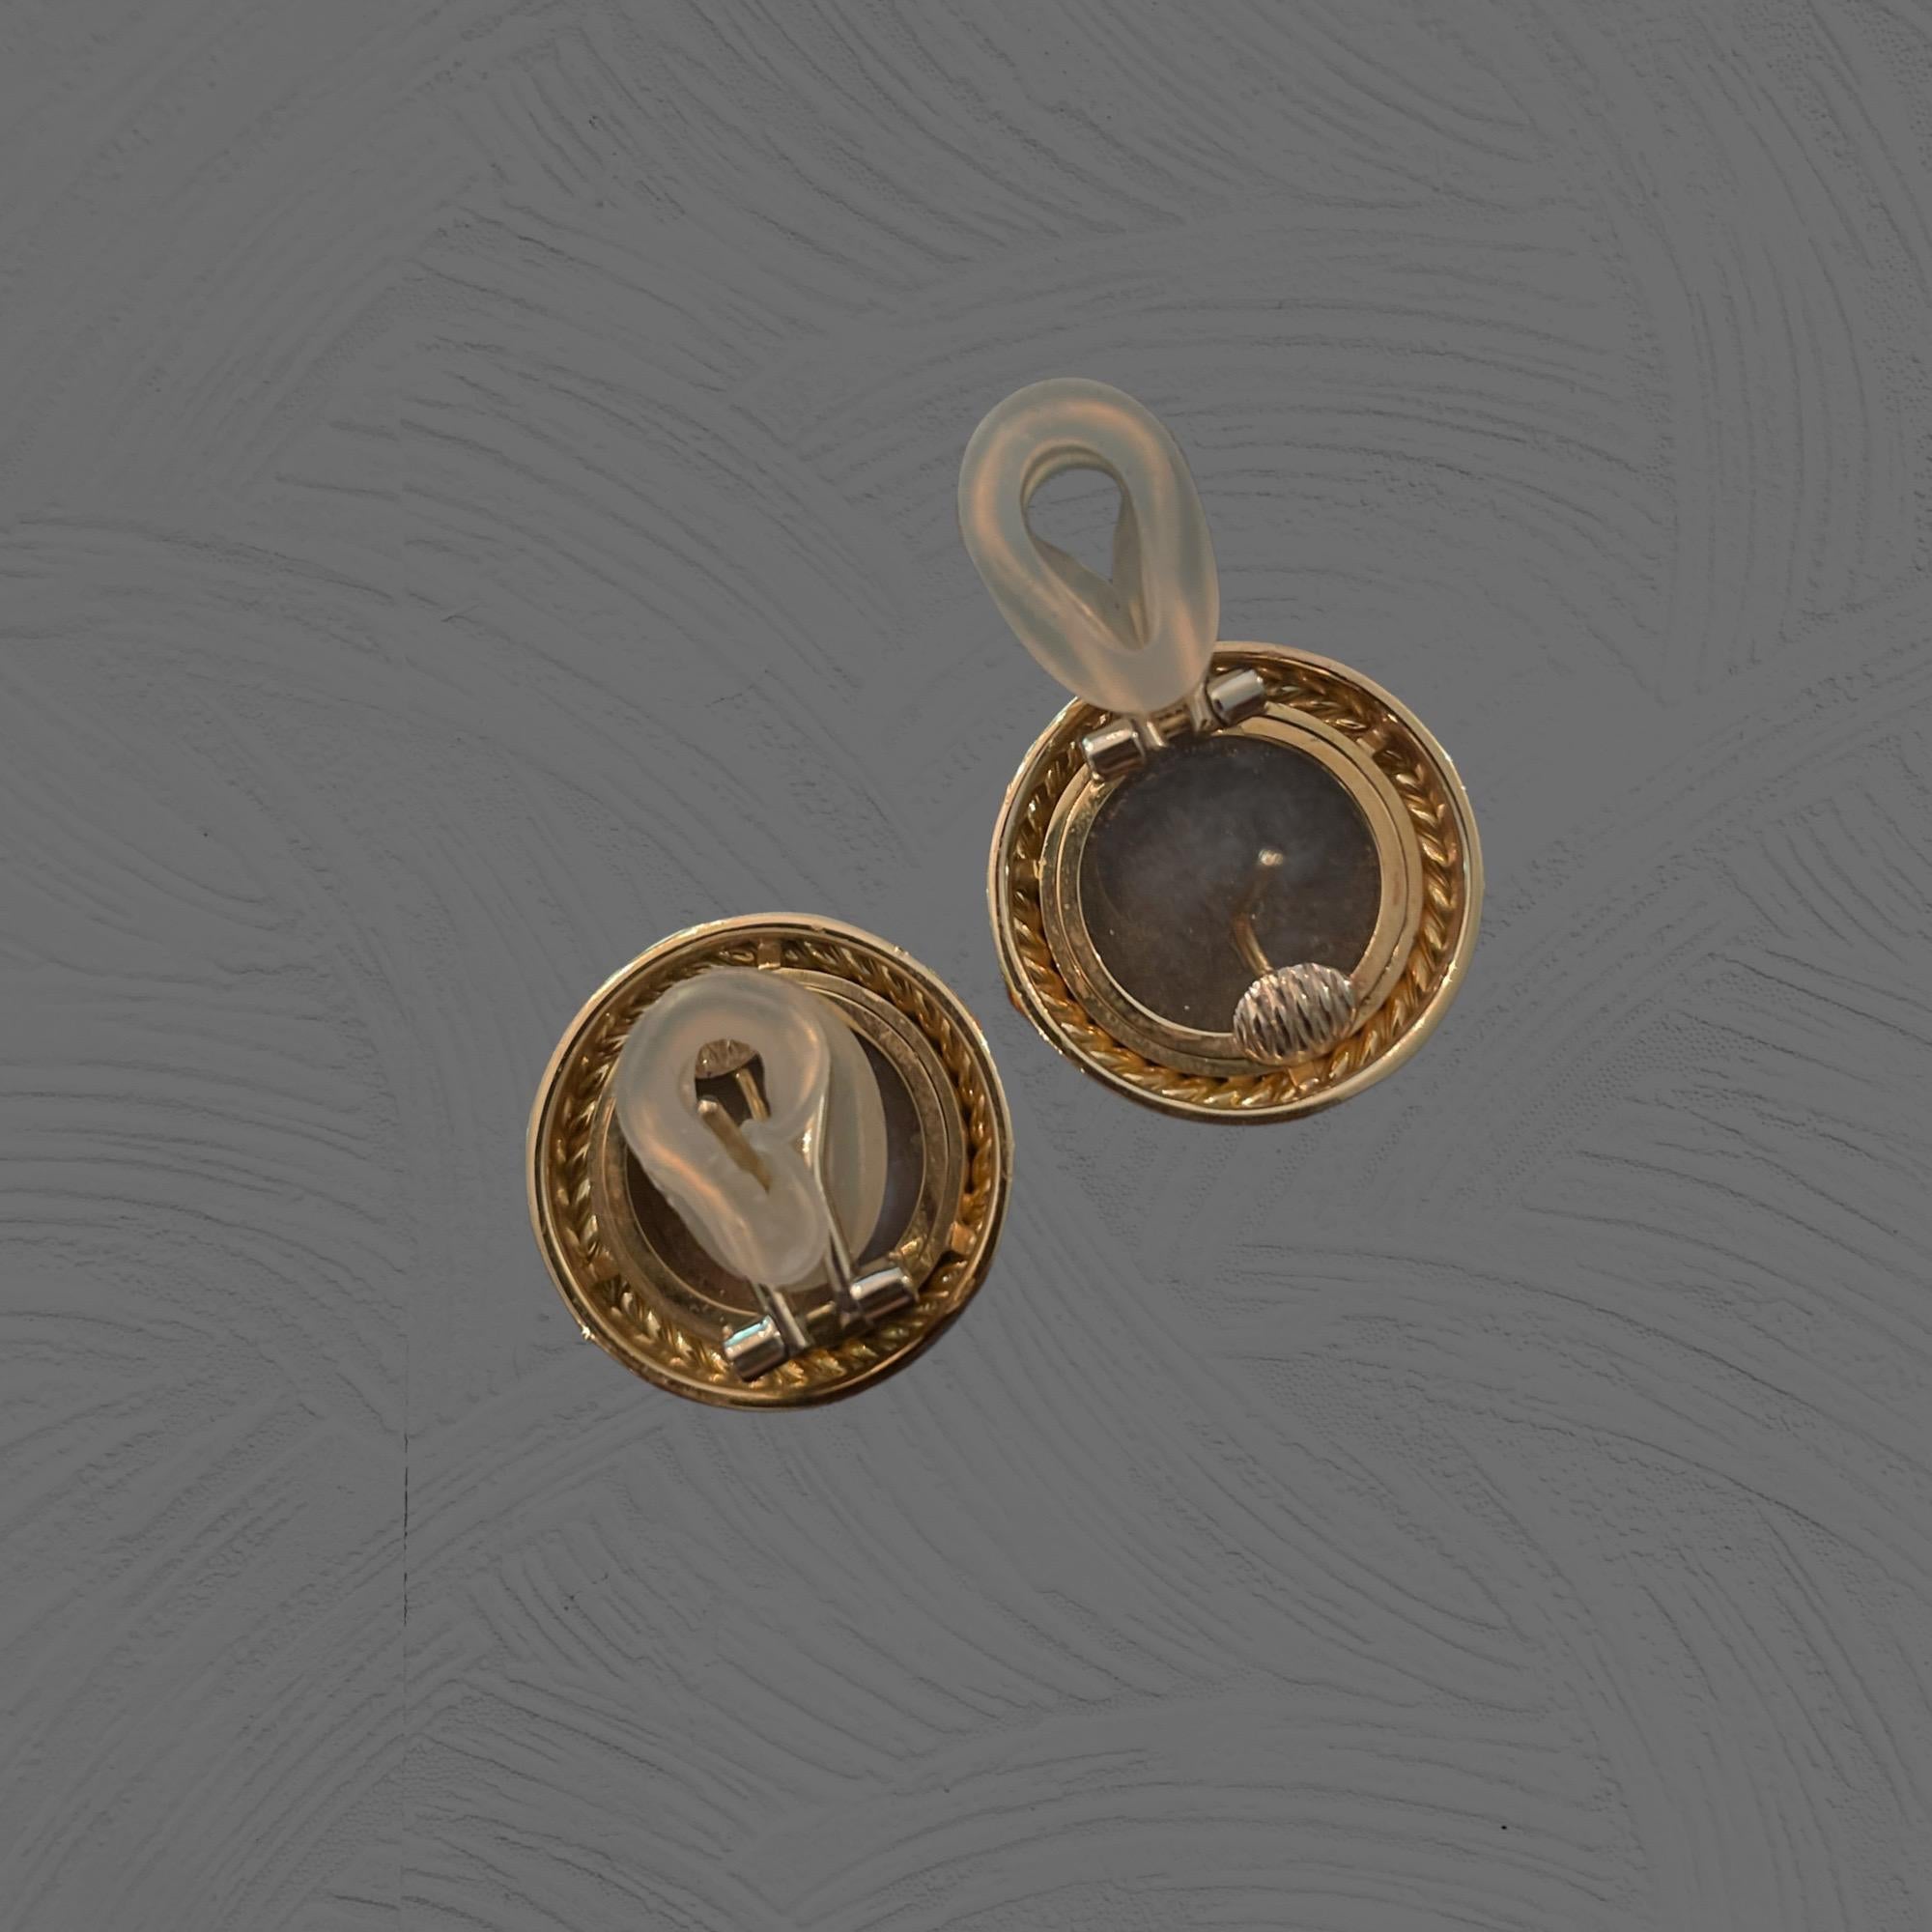 HK Fine Estate Jewels is pleased to present these classic Roman Coin Earrings set in 18kt yellow gold with very comfortable omega backings. The perfect earrings to any outfit.